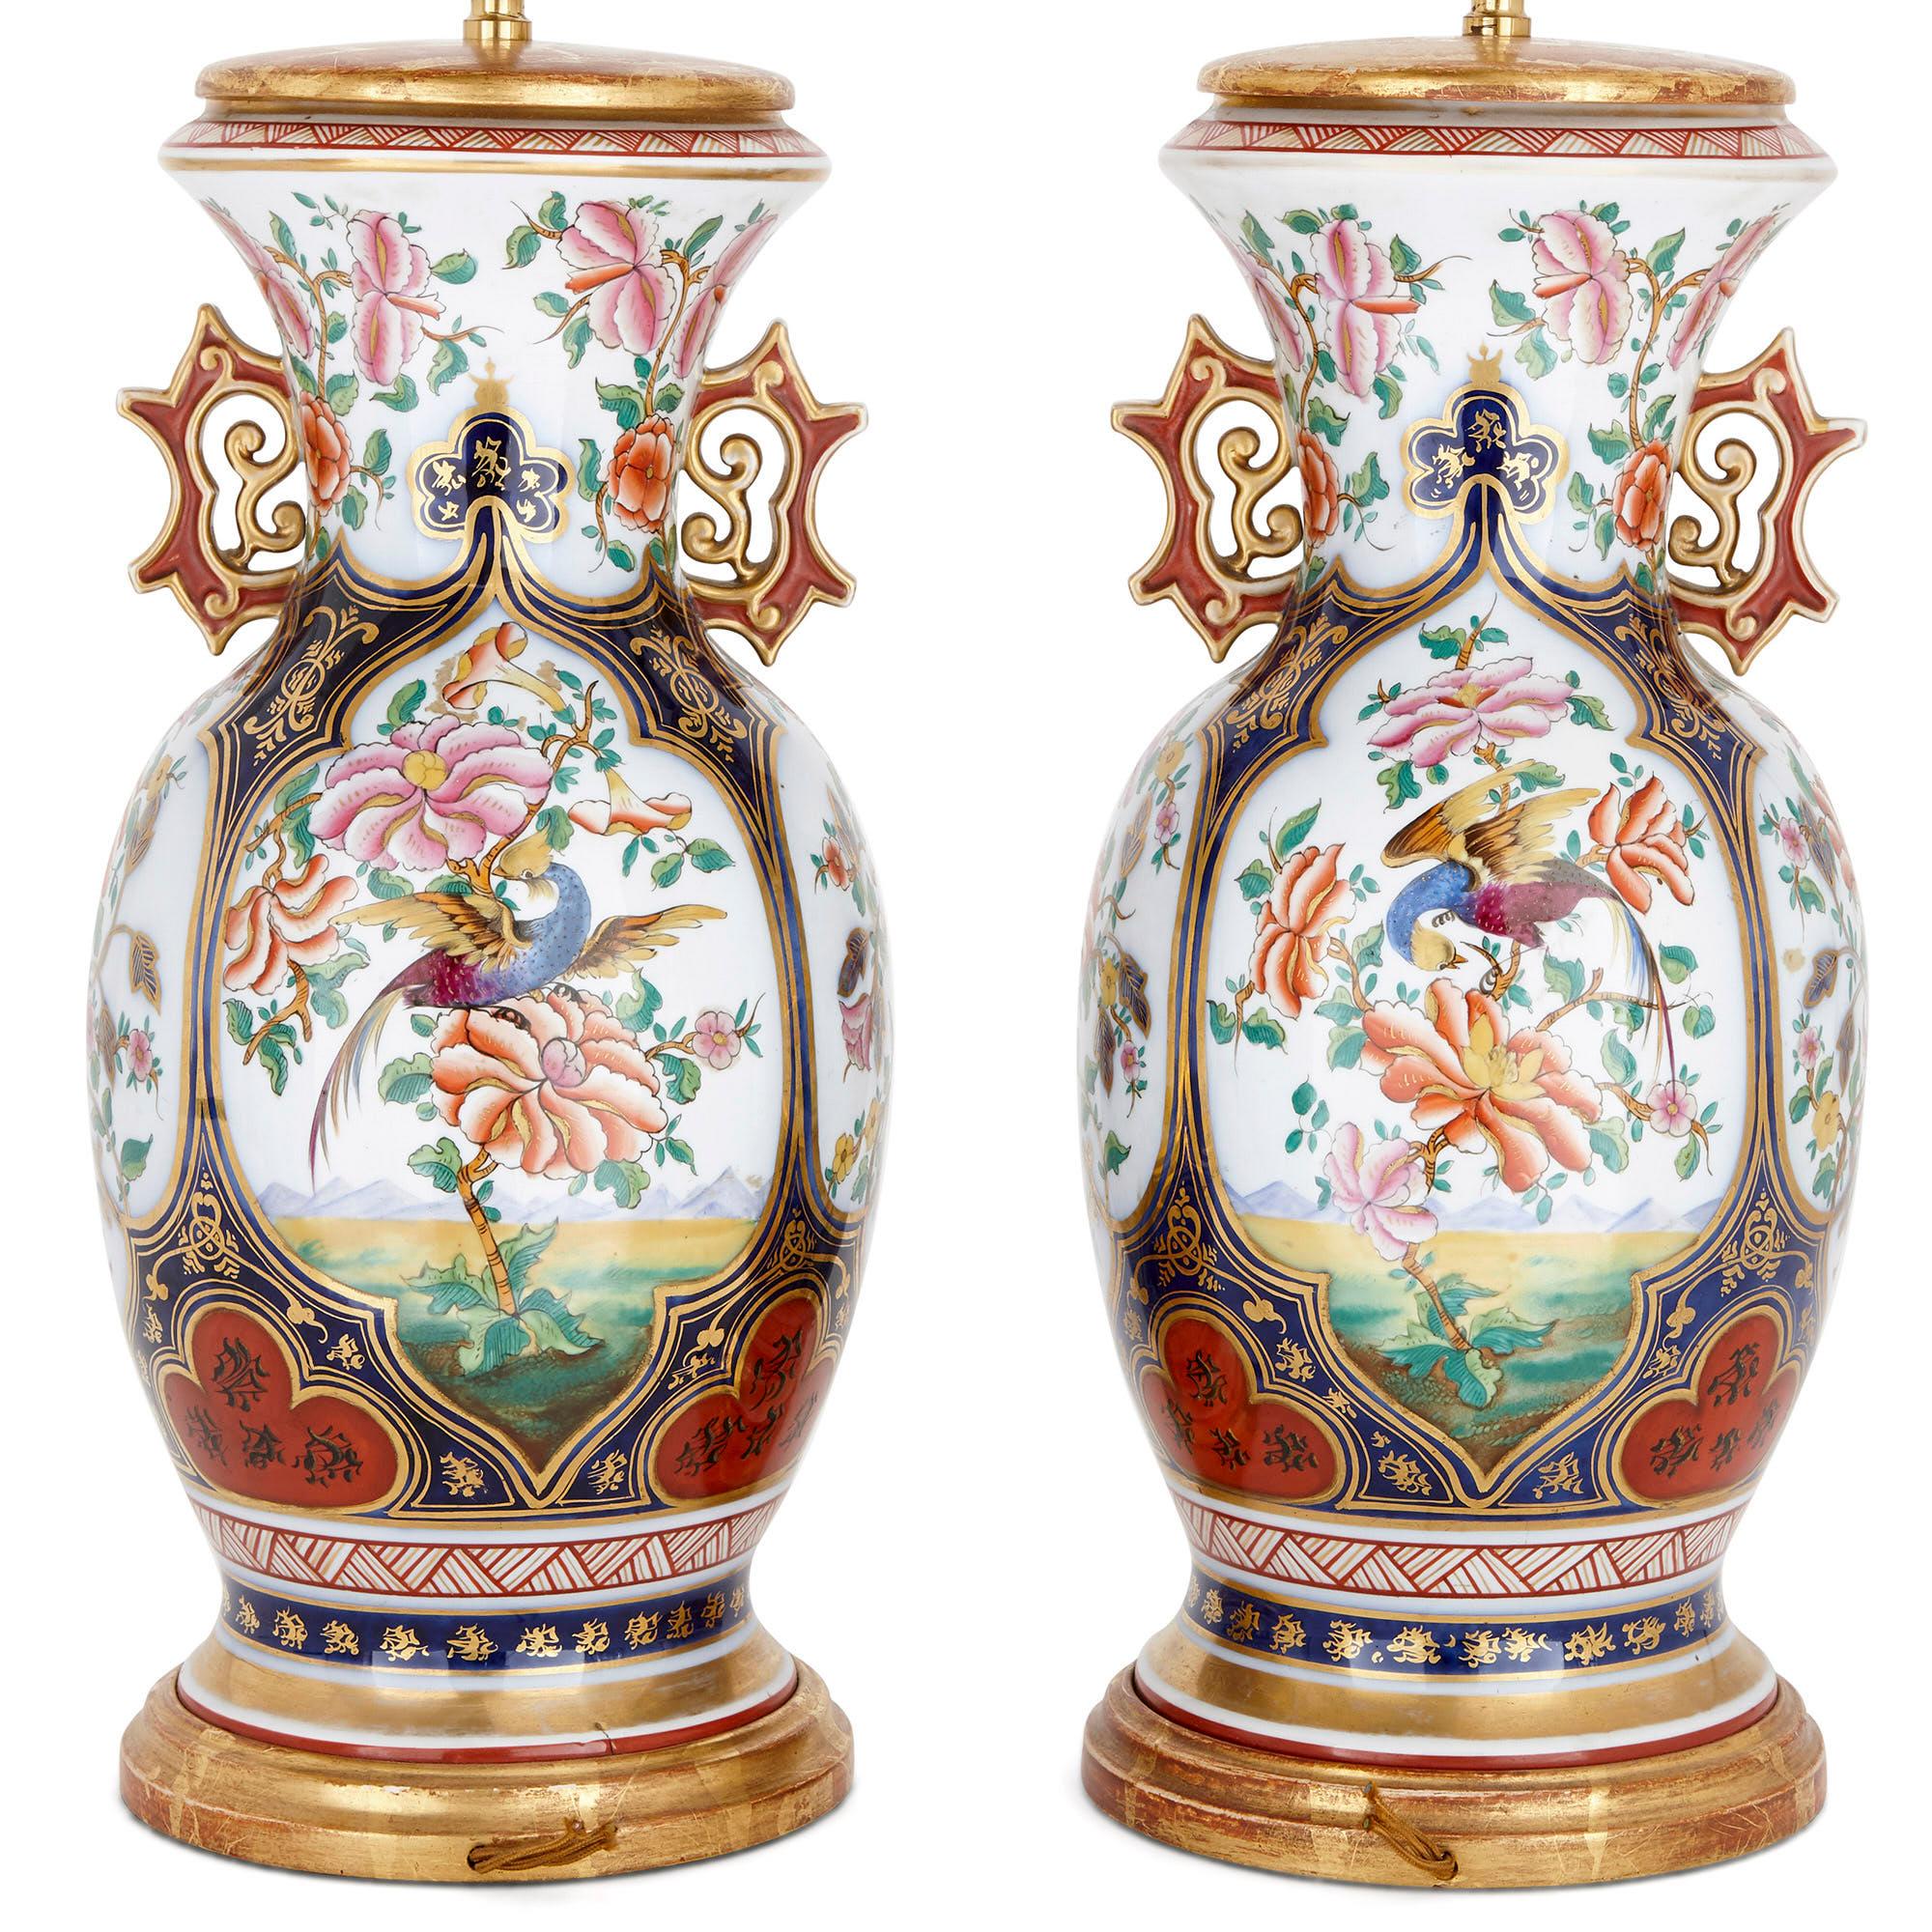 These beautiful porcelain lamps were crafted in France in the early 20th century. They are designed in the so-called ‘Chinoiserie’ style, a creative European imitation of Chinese decorative arts.

The porcelain lamps feature bodies which are